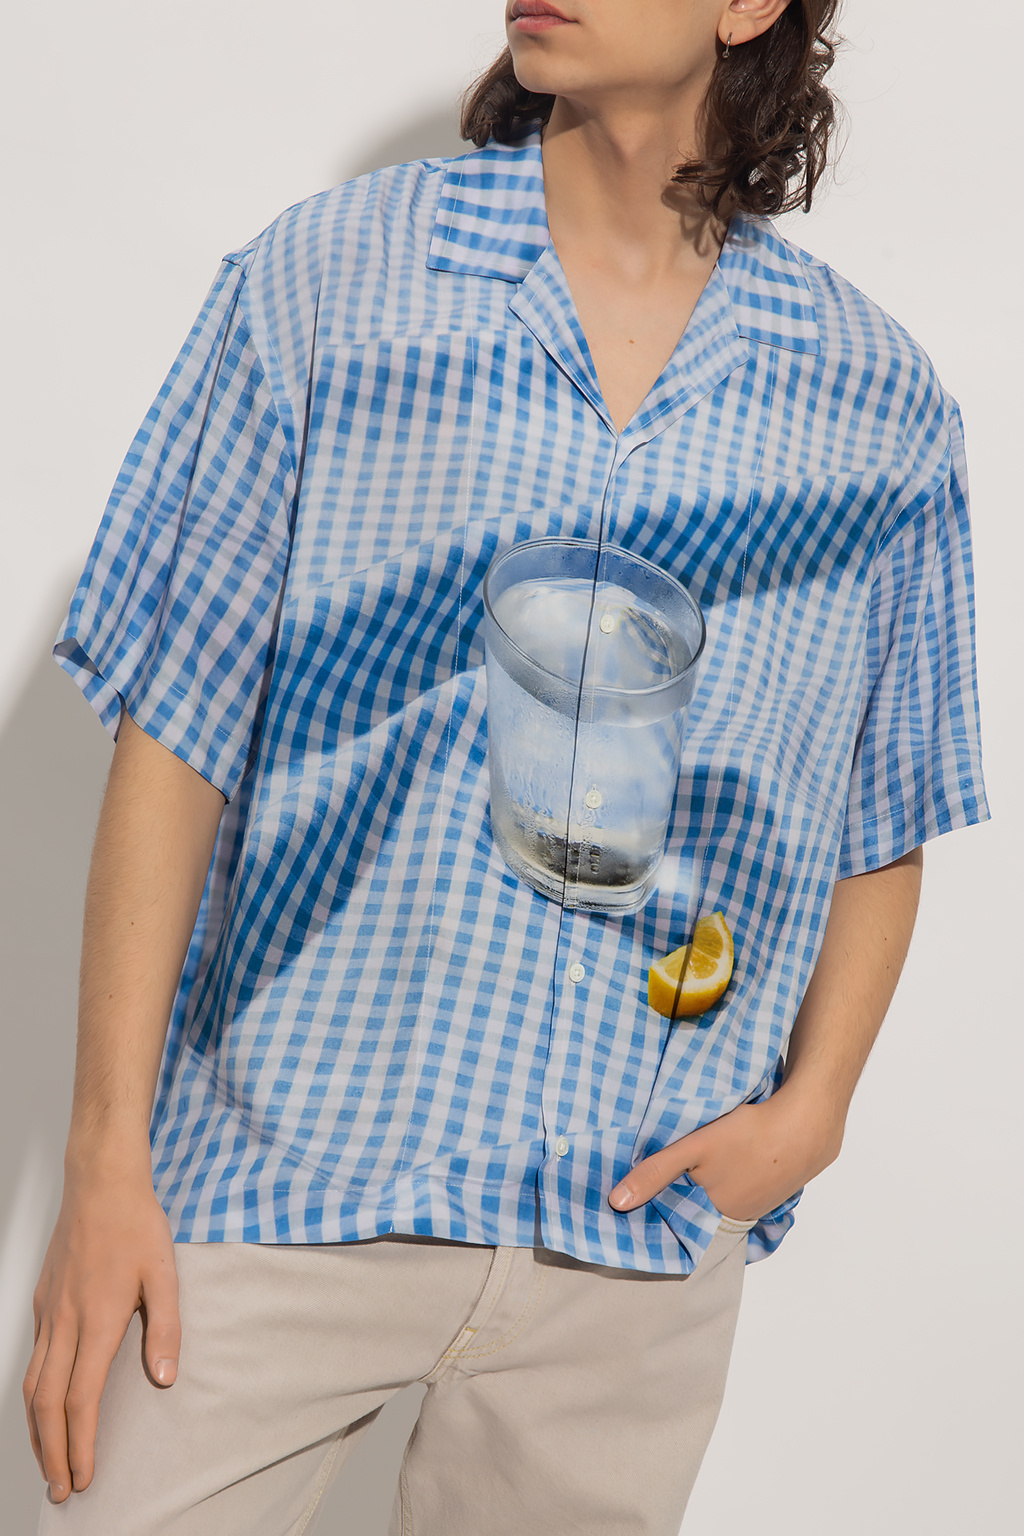 Jacquemus ‘Jean’ product shirt with short sleeves